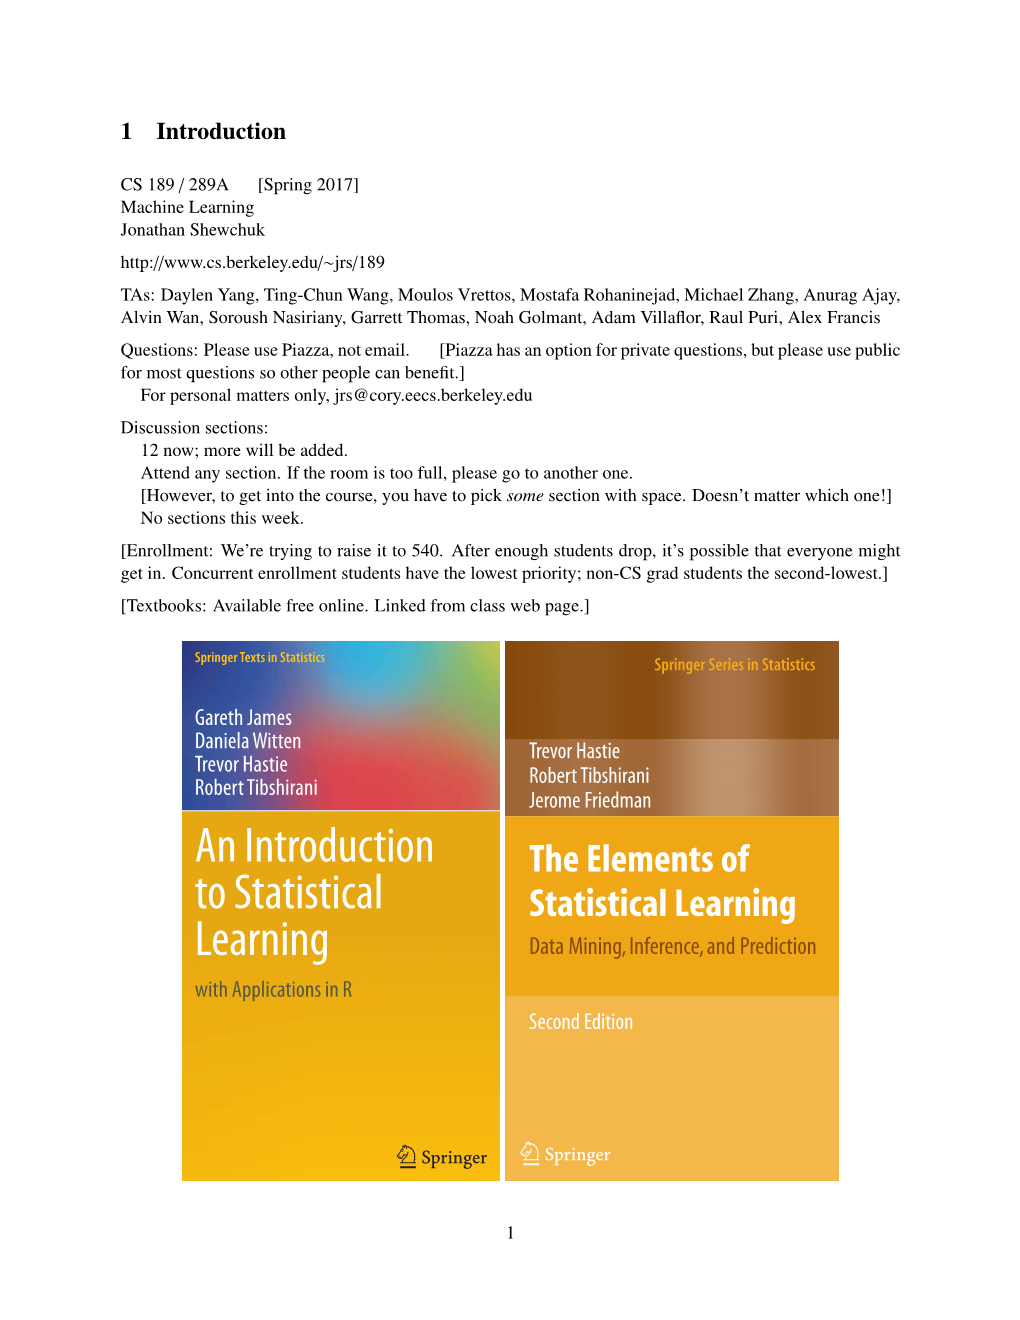 1 an Introduction to Statistical Learning